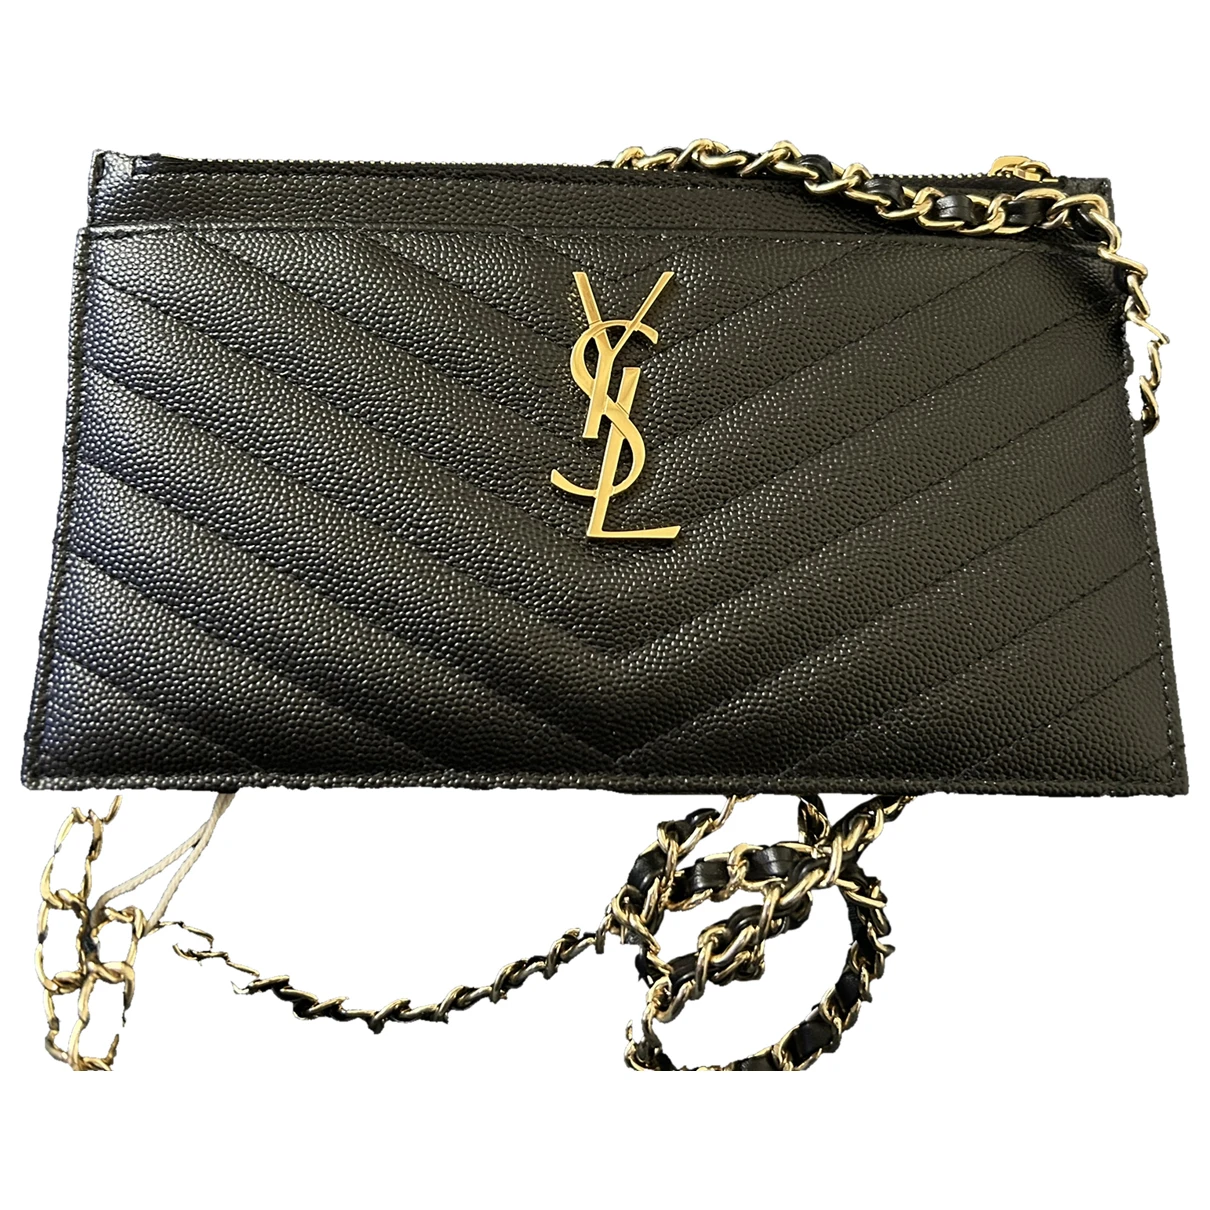 Pre-owned Saint Laurent Patent Leather Crossbody Bag In Black